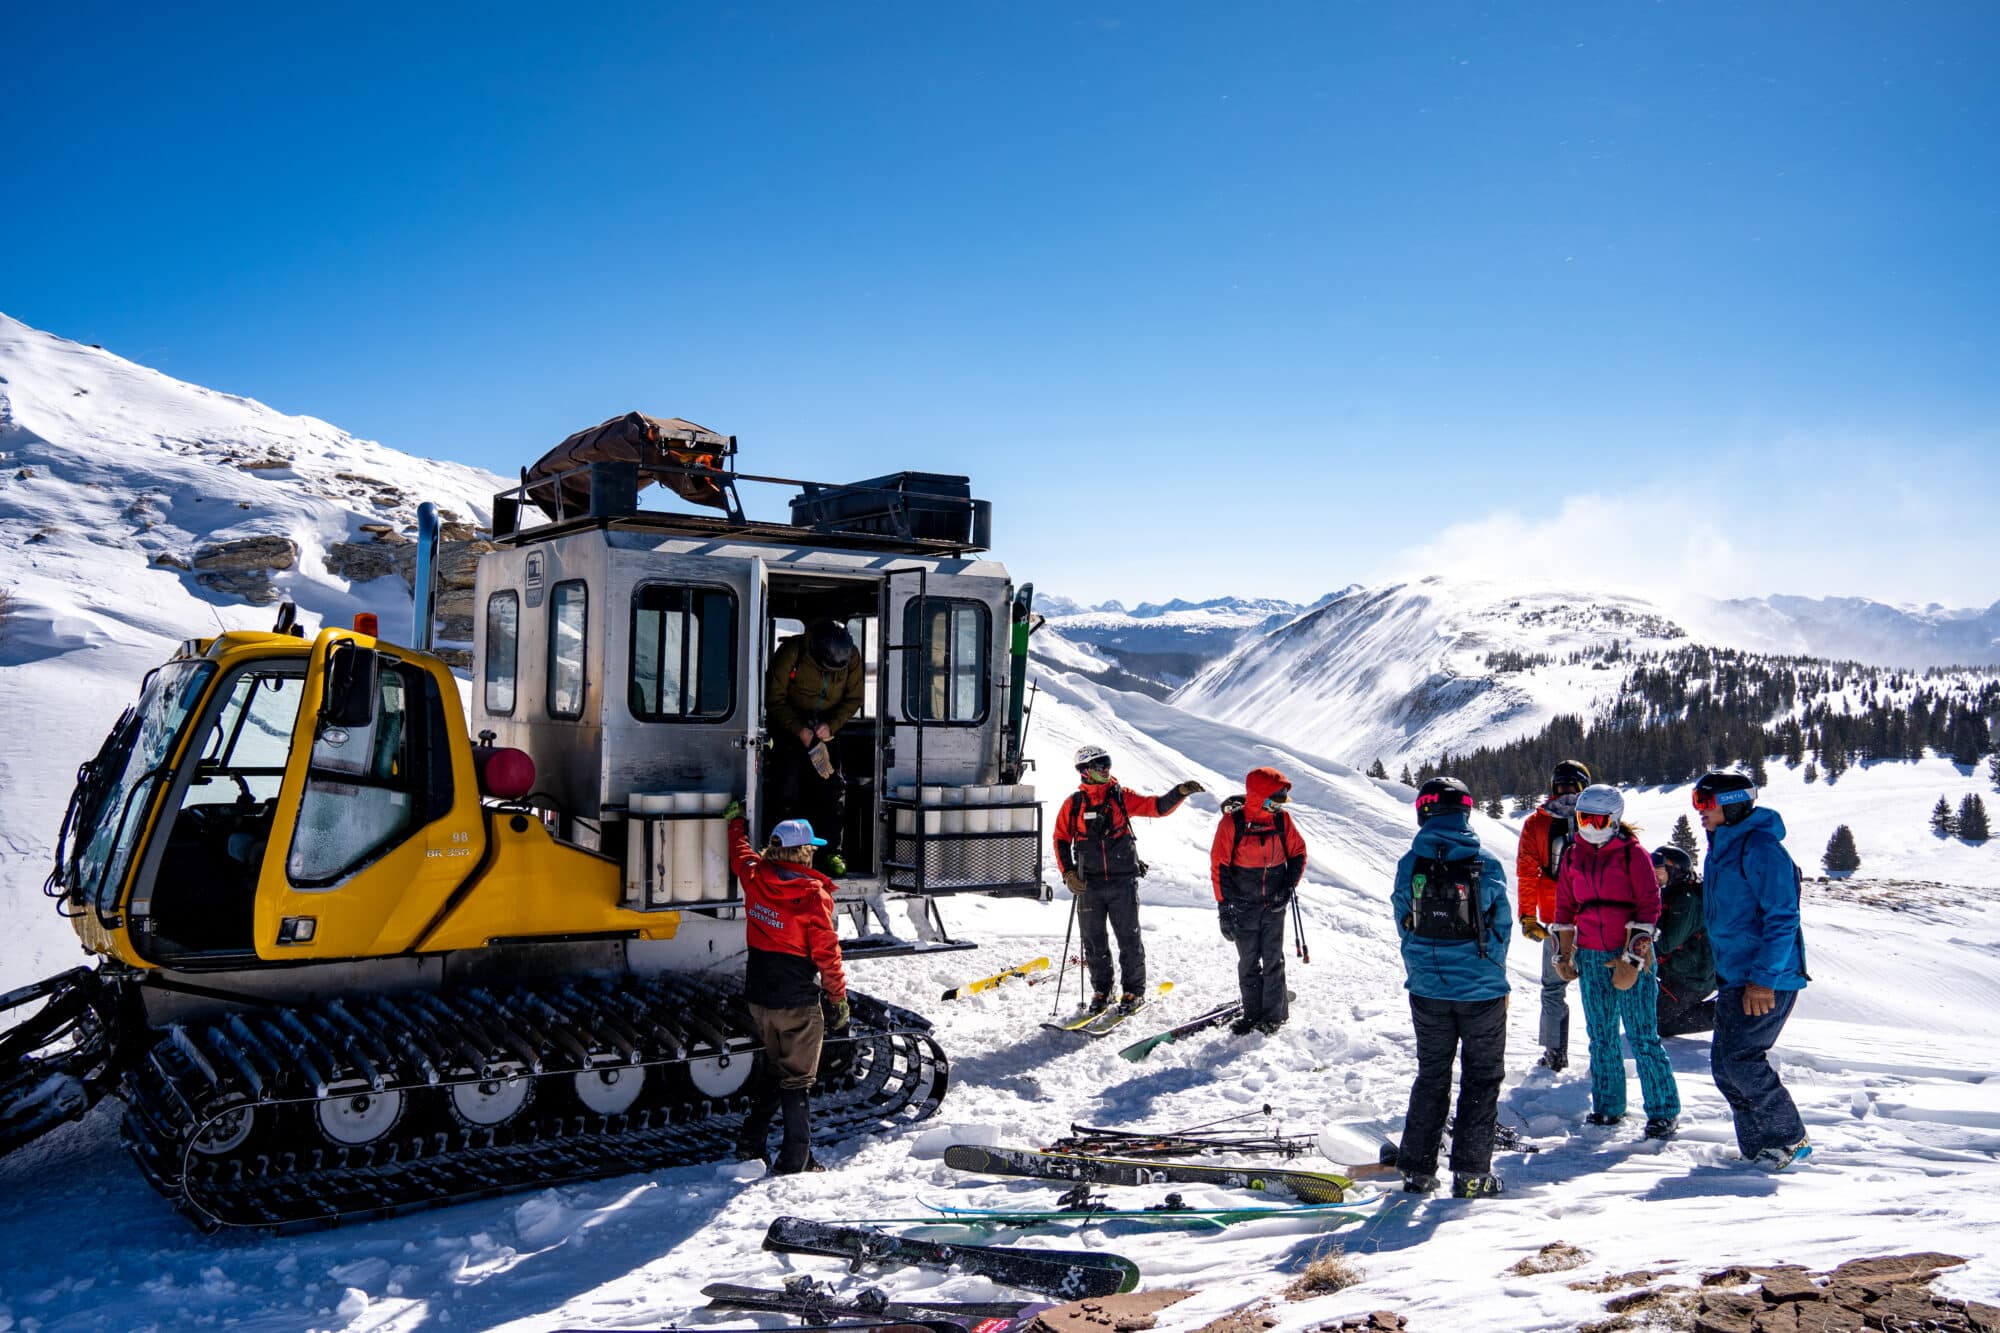 Group unloads the snowcat and prepares for the first decent of the day